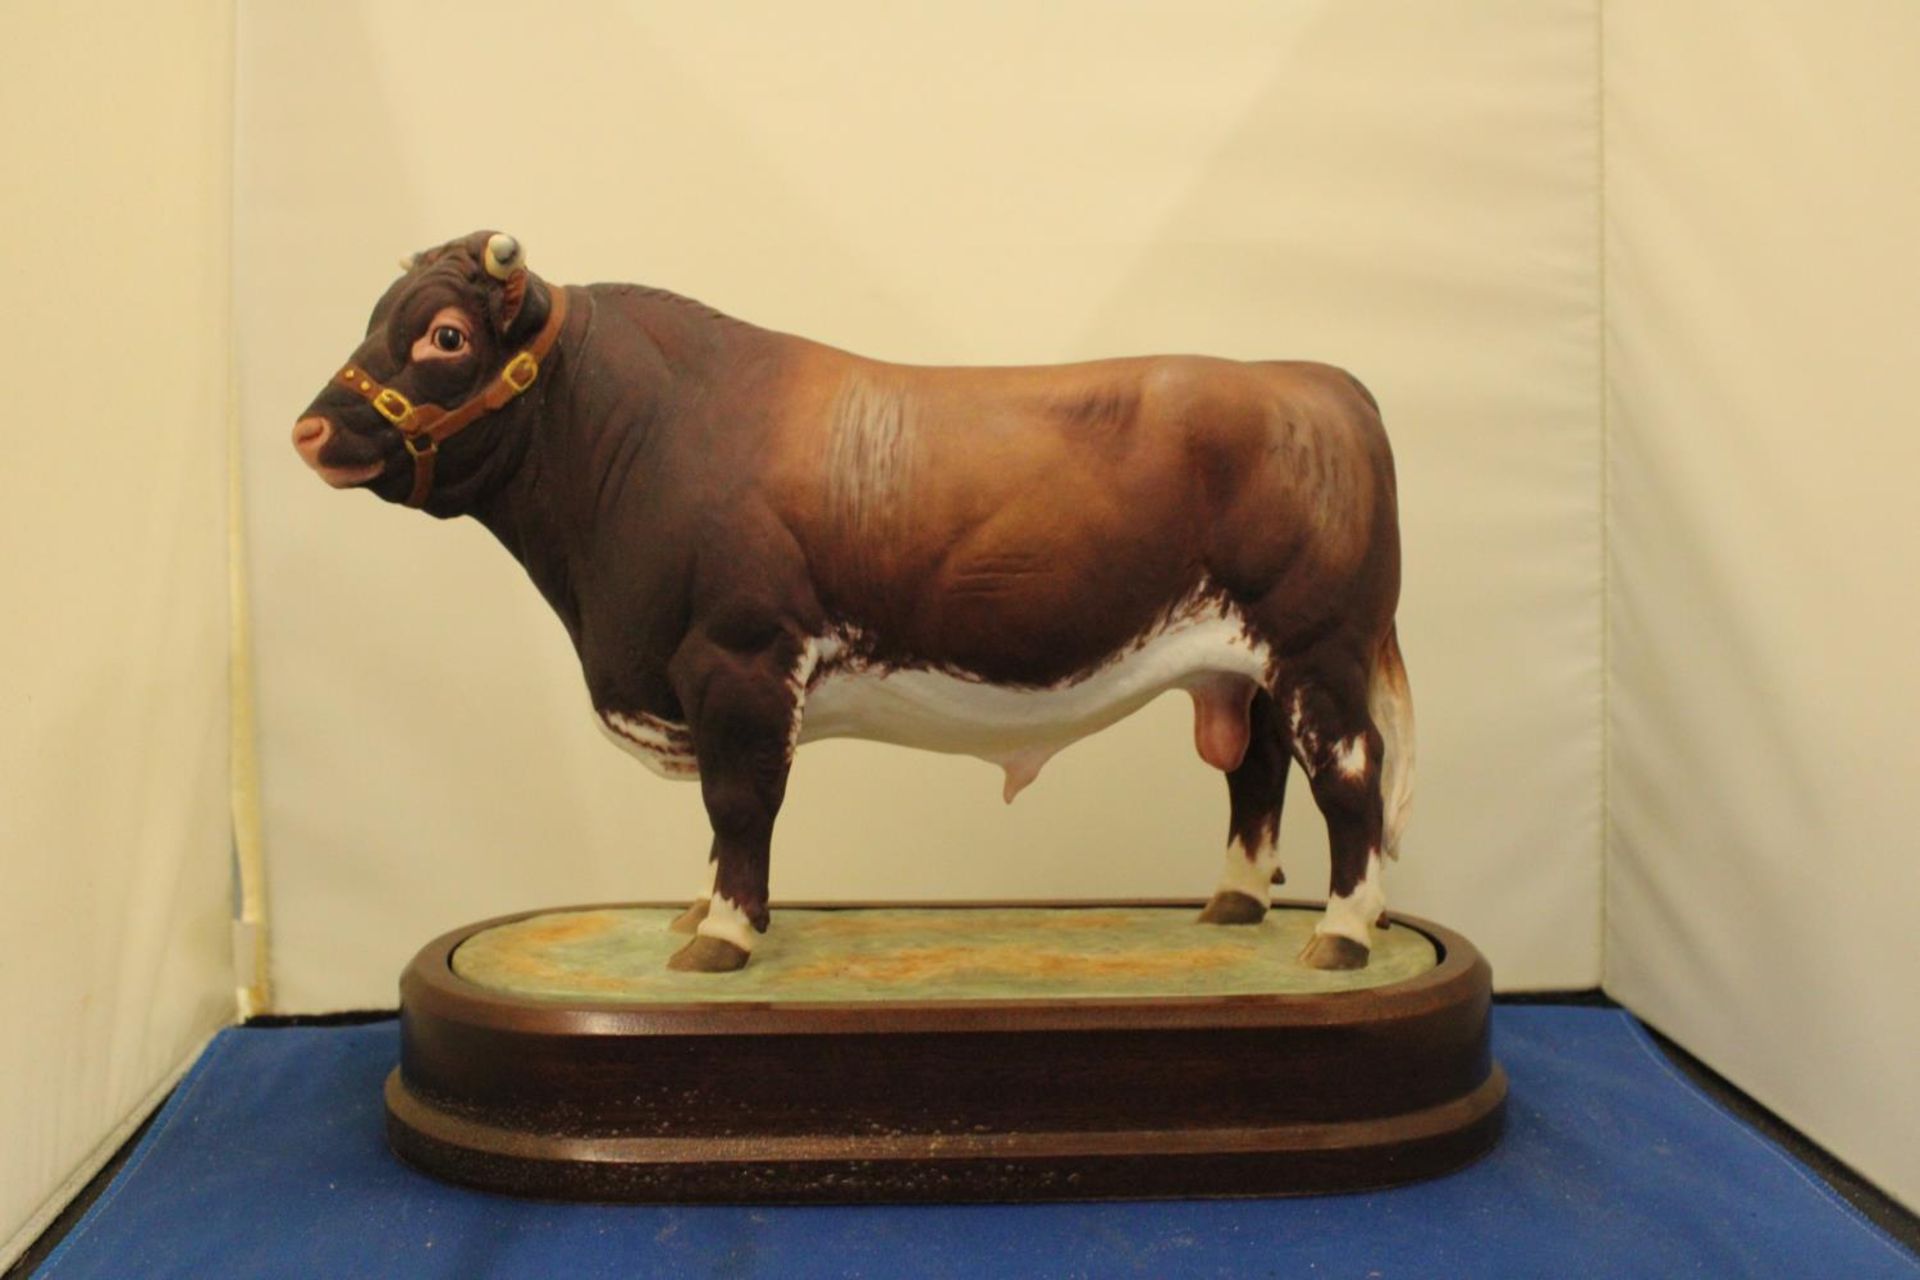 A ROYAL WORCESTER MODEL OF A DAIRY SHORTHORN BULL MODELLED BY DORIS LINDNER PRODUCED IN A LIMITED - Image 2 of 5